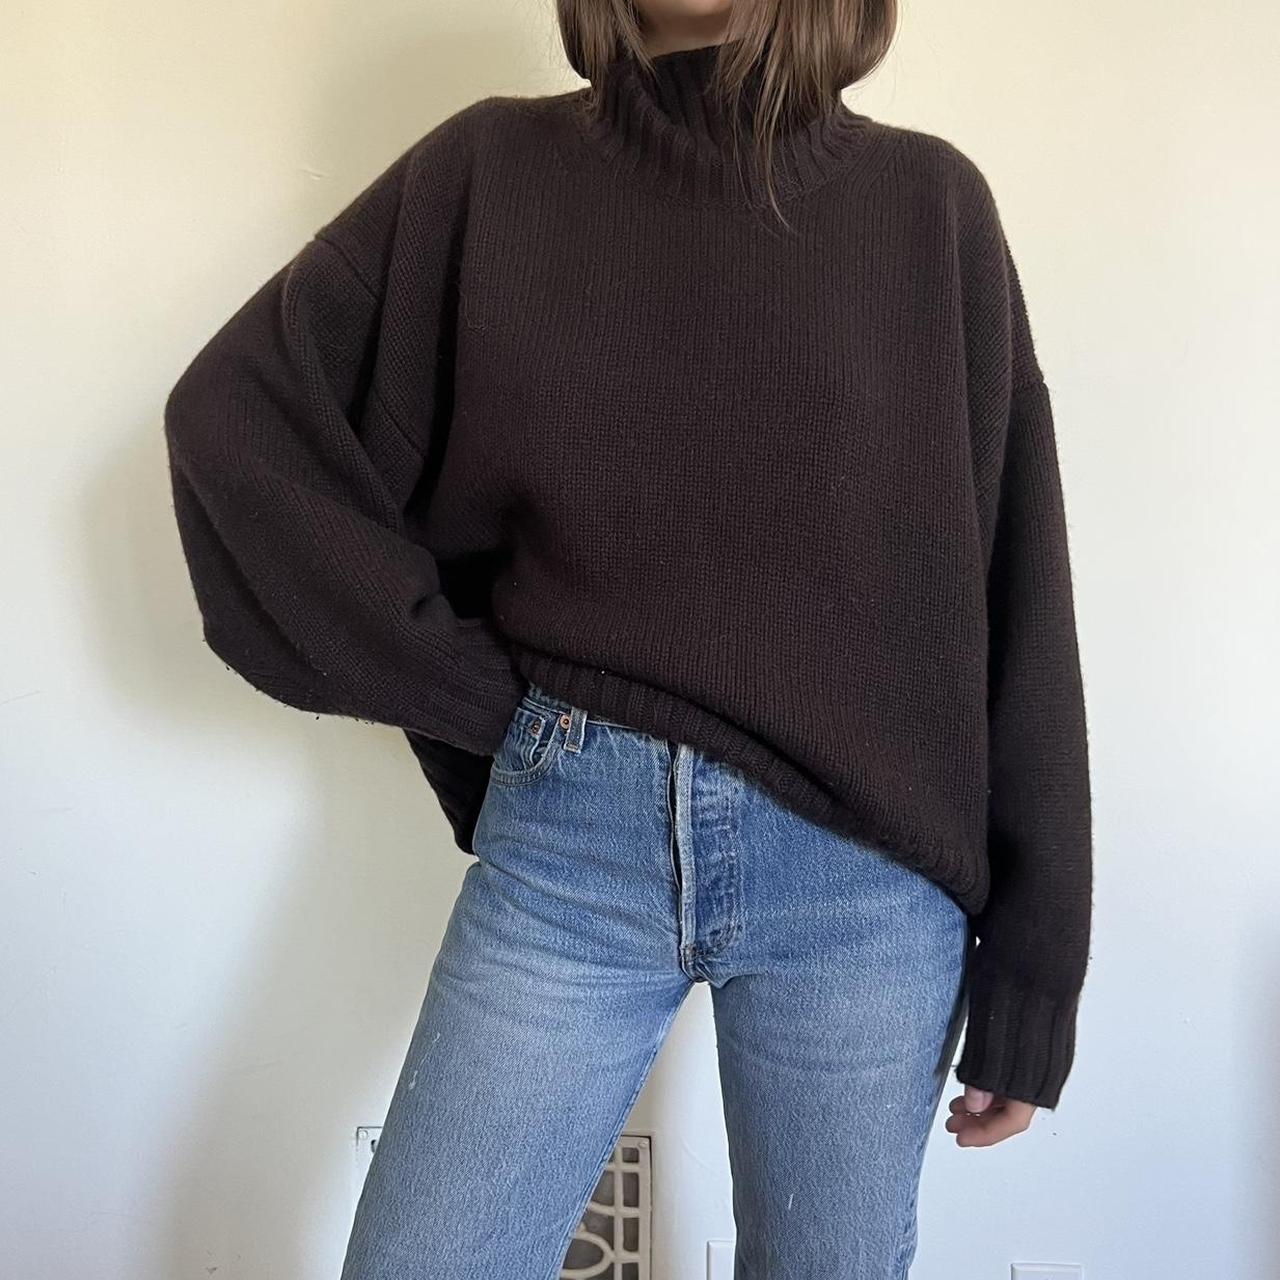 COS chunky pure cashmere turtleneck sweater in dark... - Depop